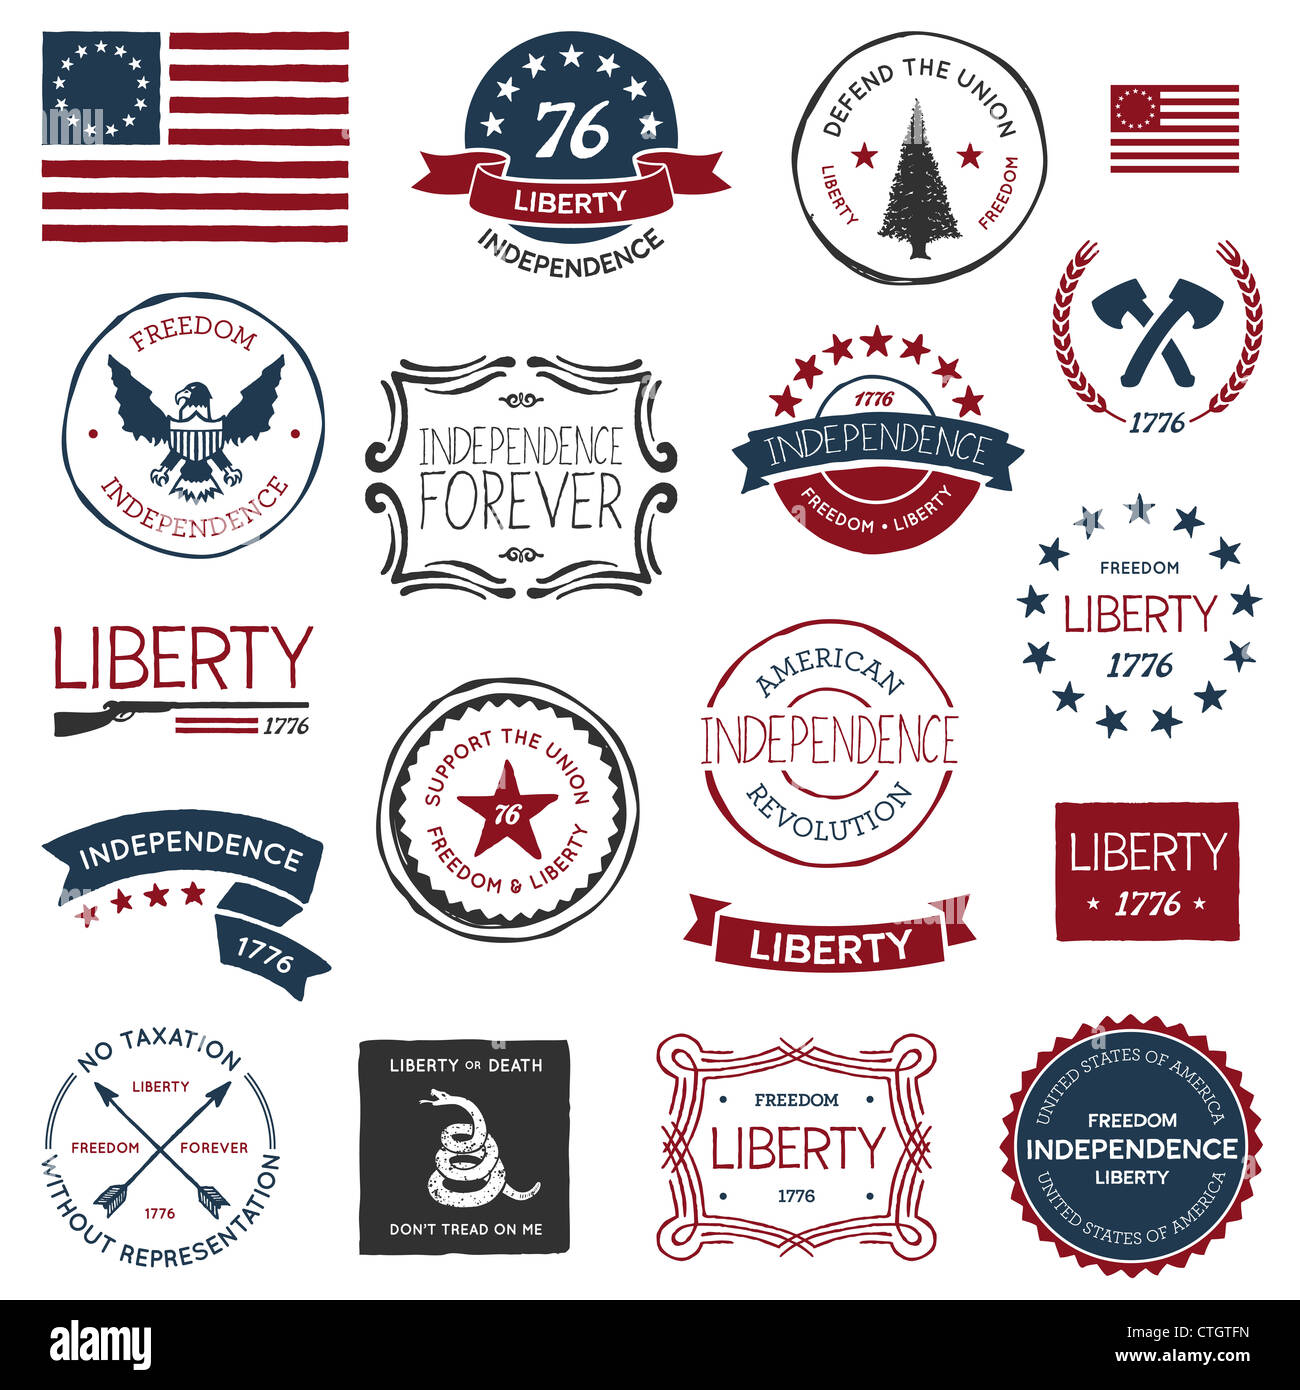 Vintage American revolutionary war badges, labels and designs Stock Photo